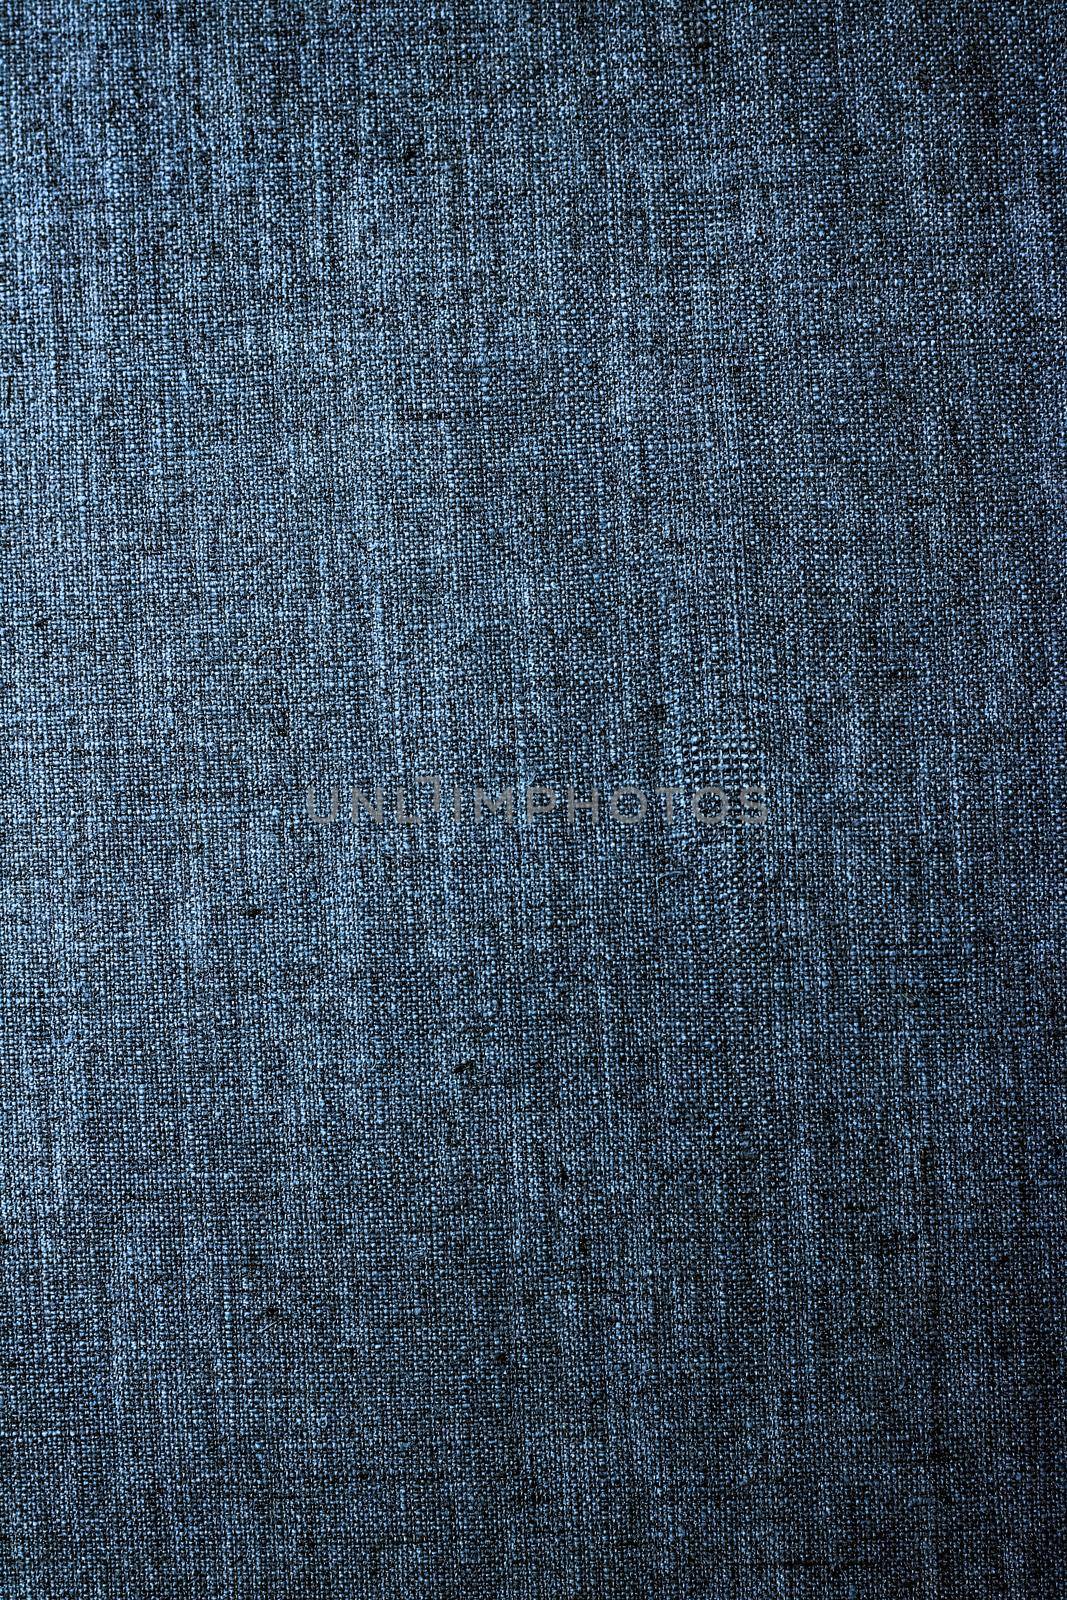 Decorative linen blue jeans fabric textured background for interior, furniture design and fashion label backdrop by Anneleven